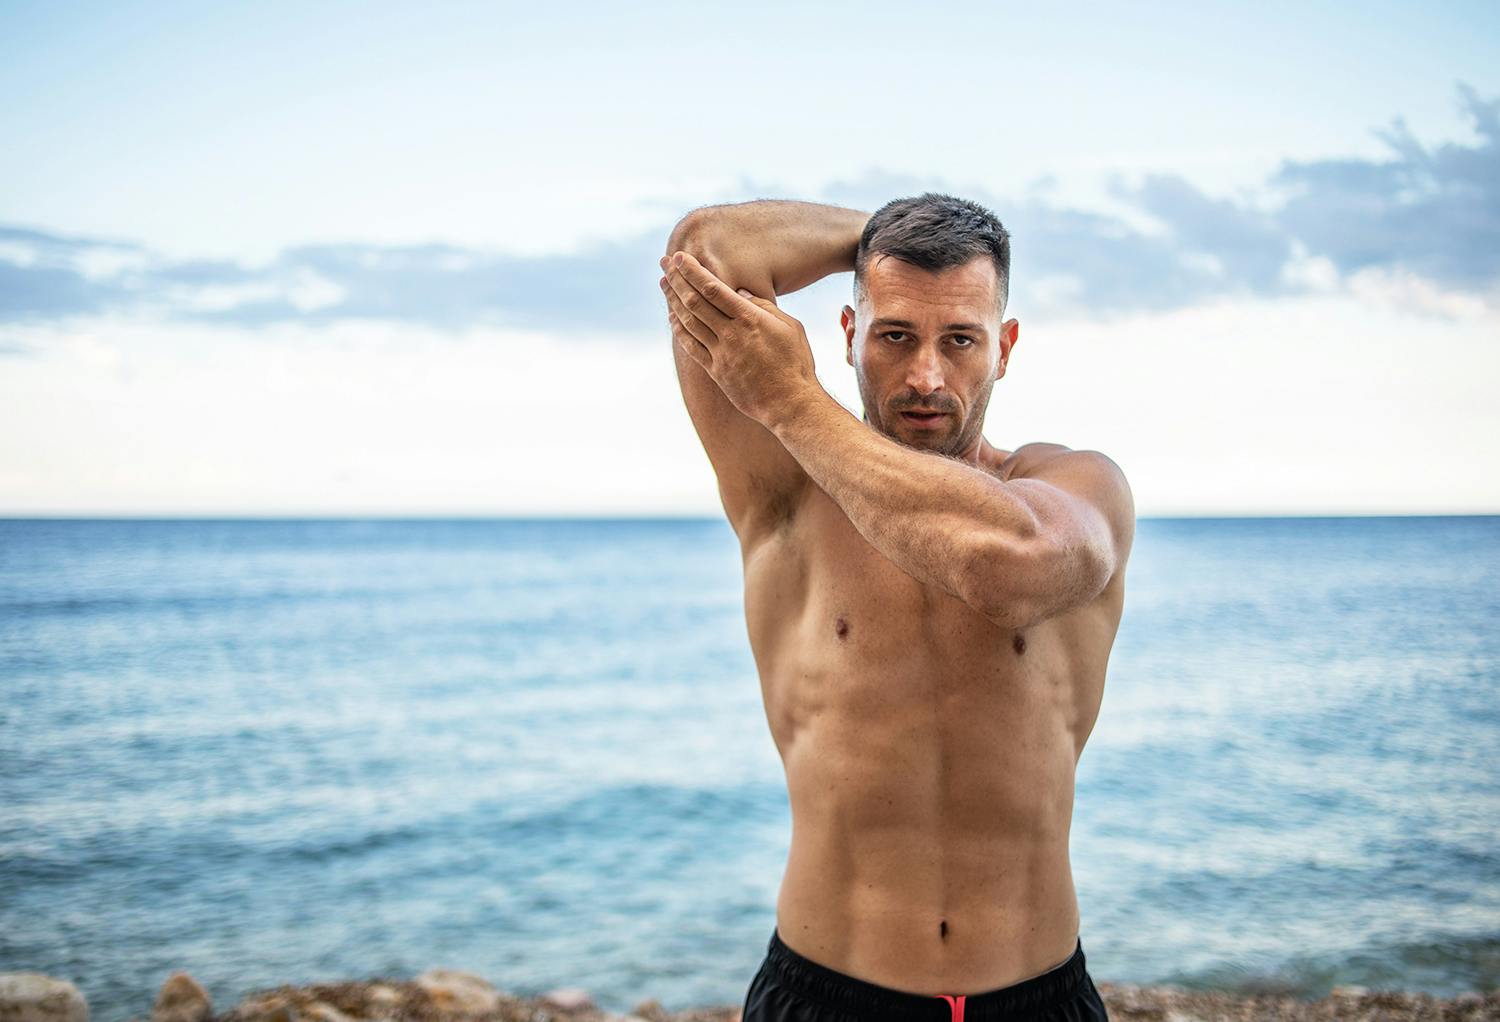 Fit, Shirtless Man Stretching with the Ocean in the Background